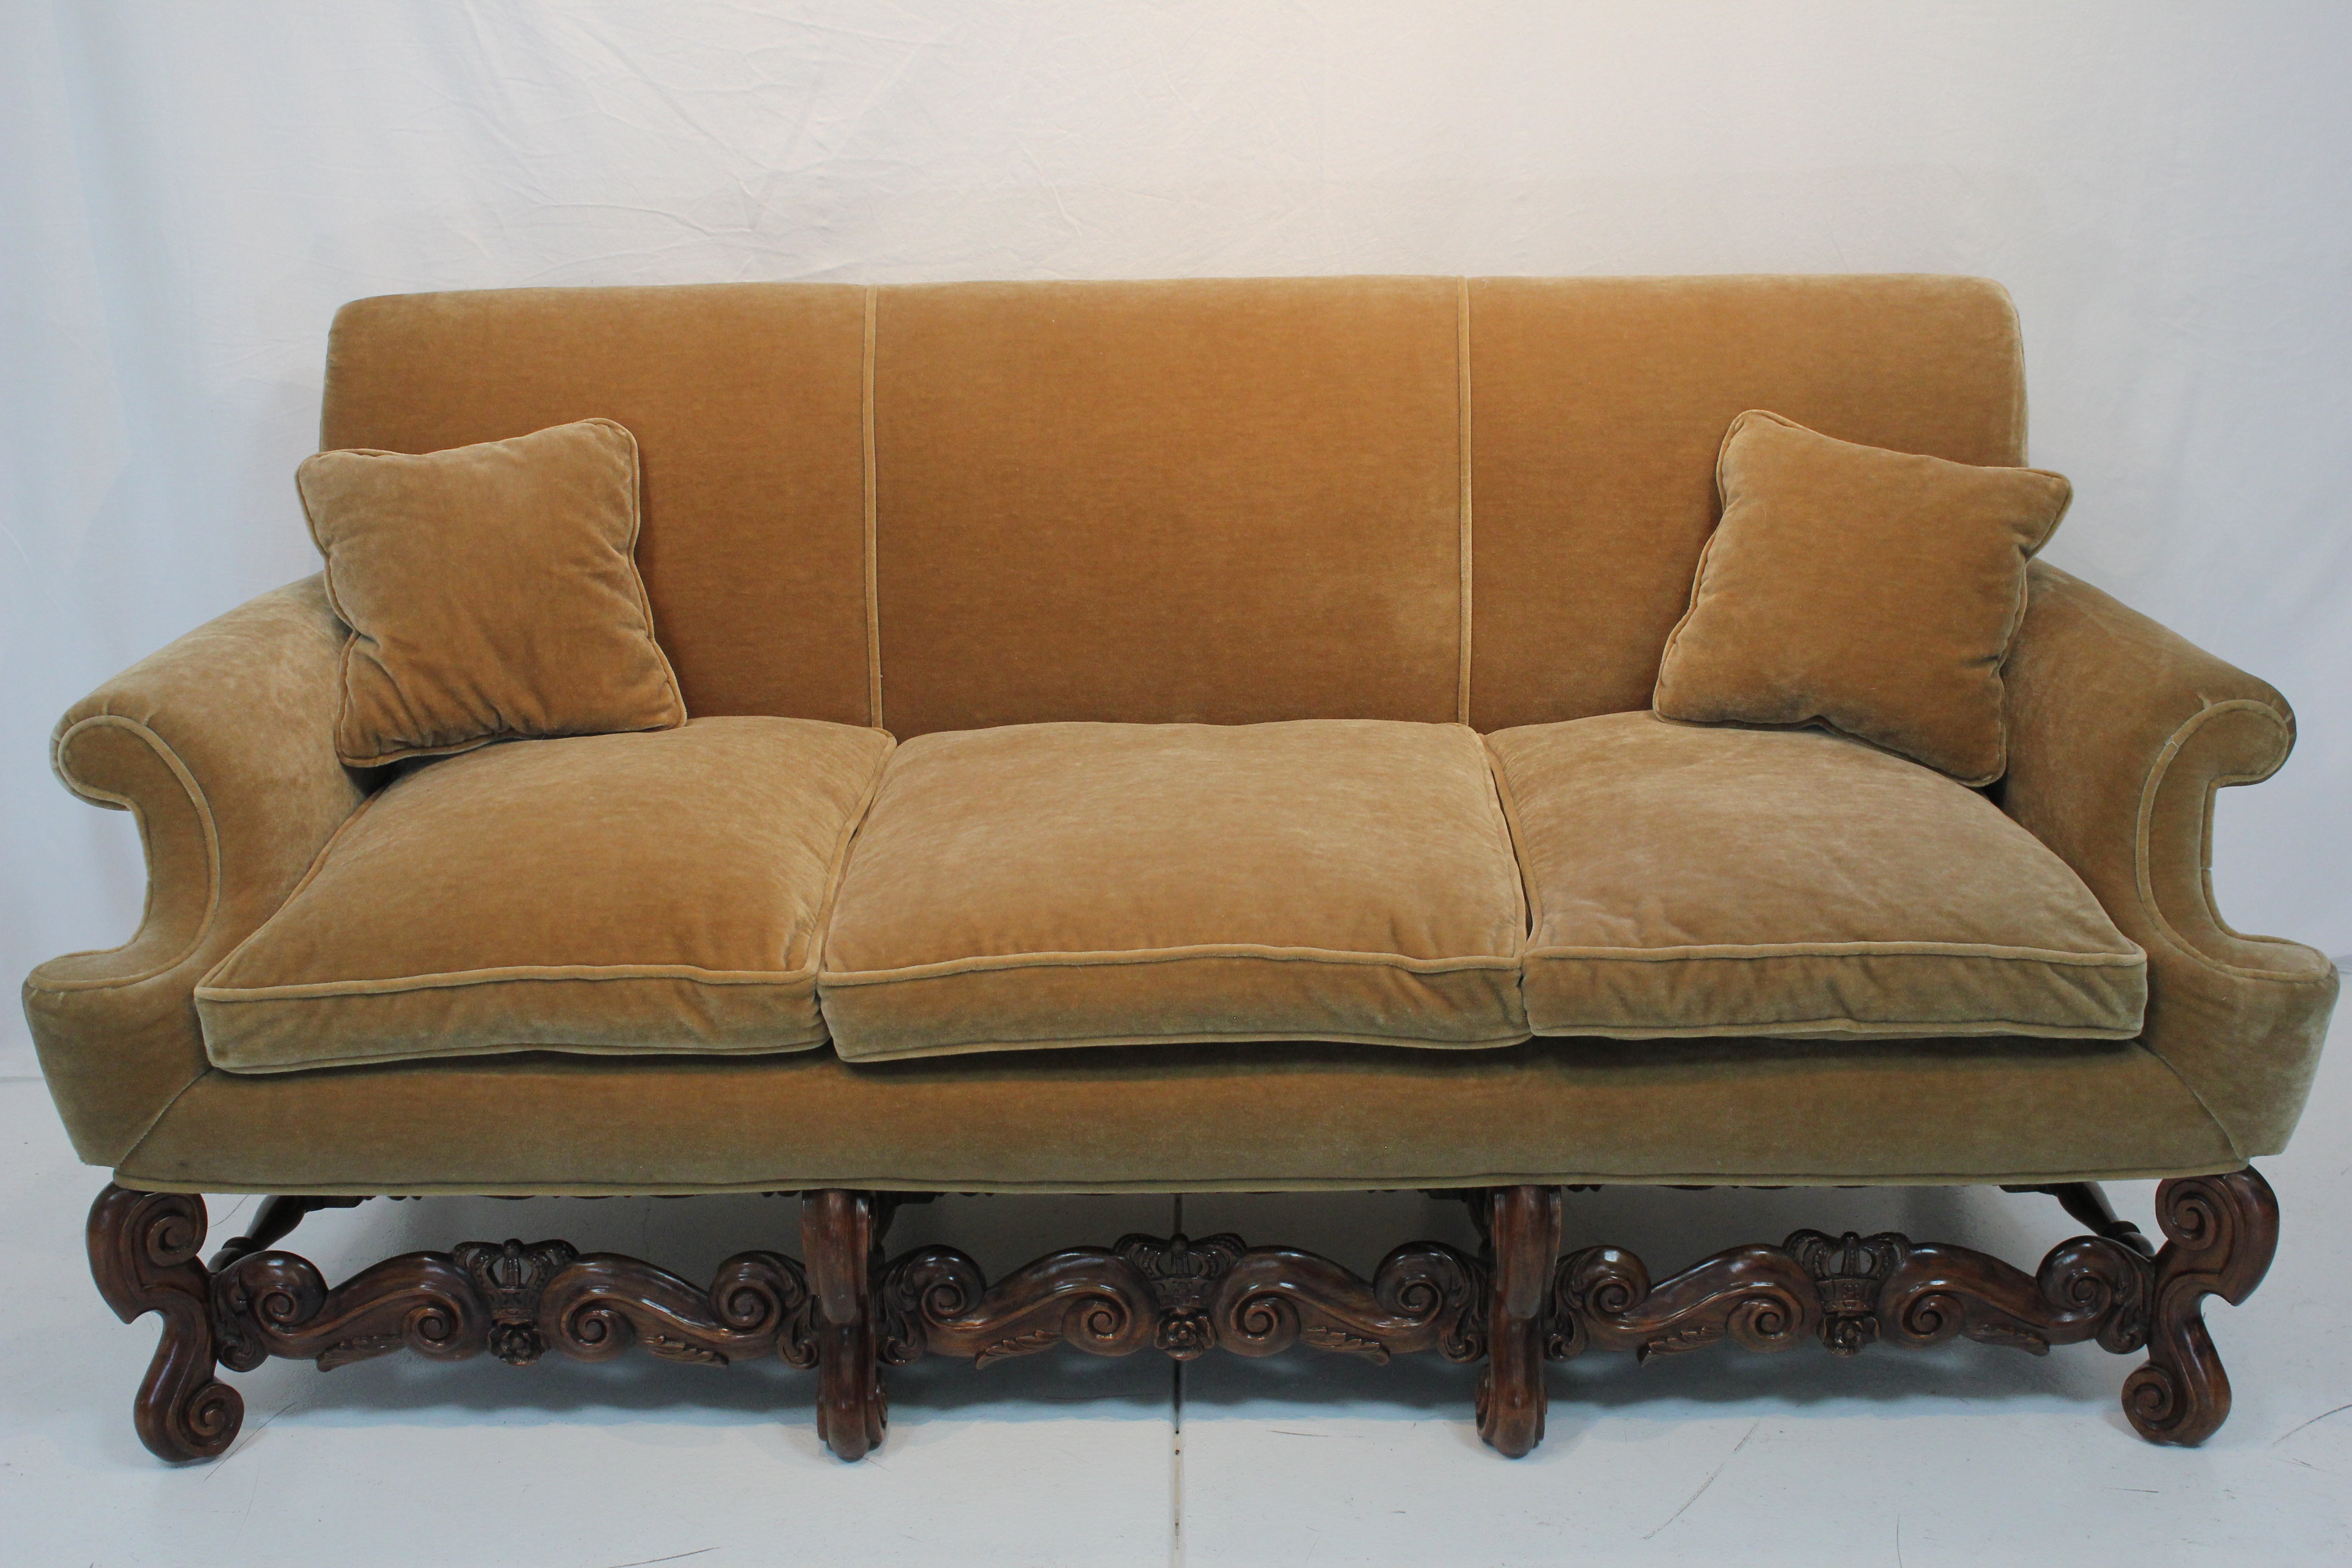 AF2-125: Antique Pair of Early 20th Century Charles II Style Carved Walnut Sofas w/ Mohair Upholstery